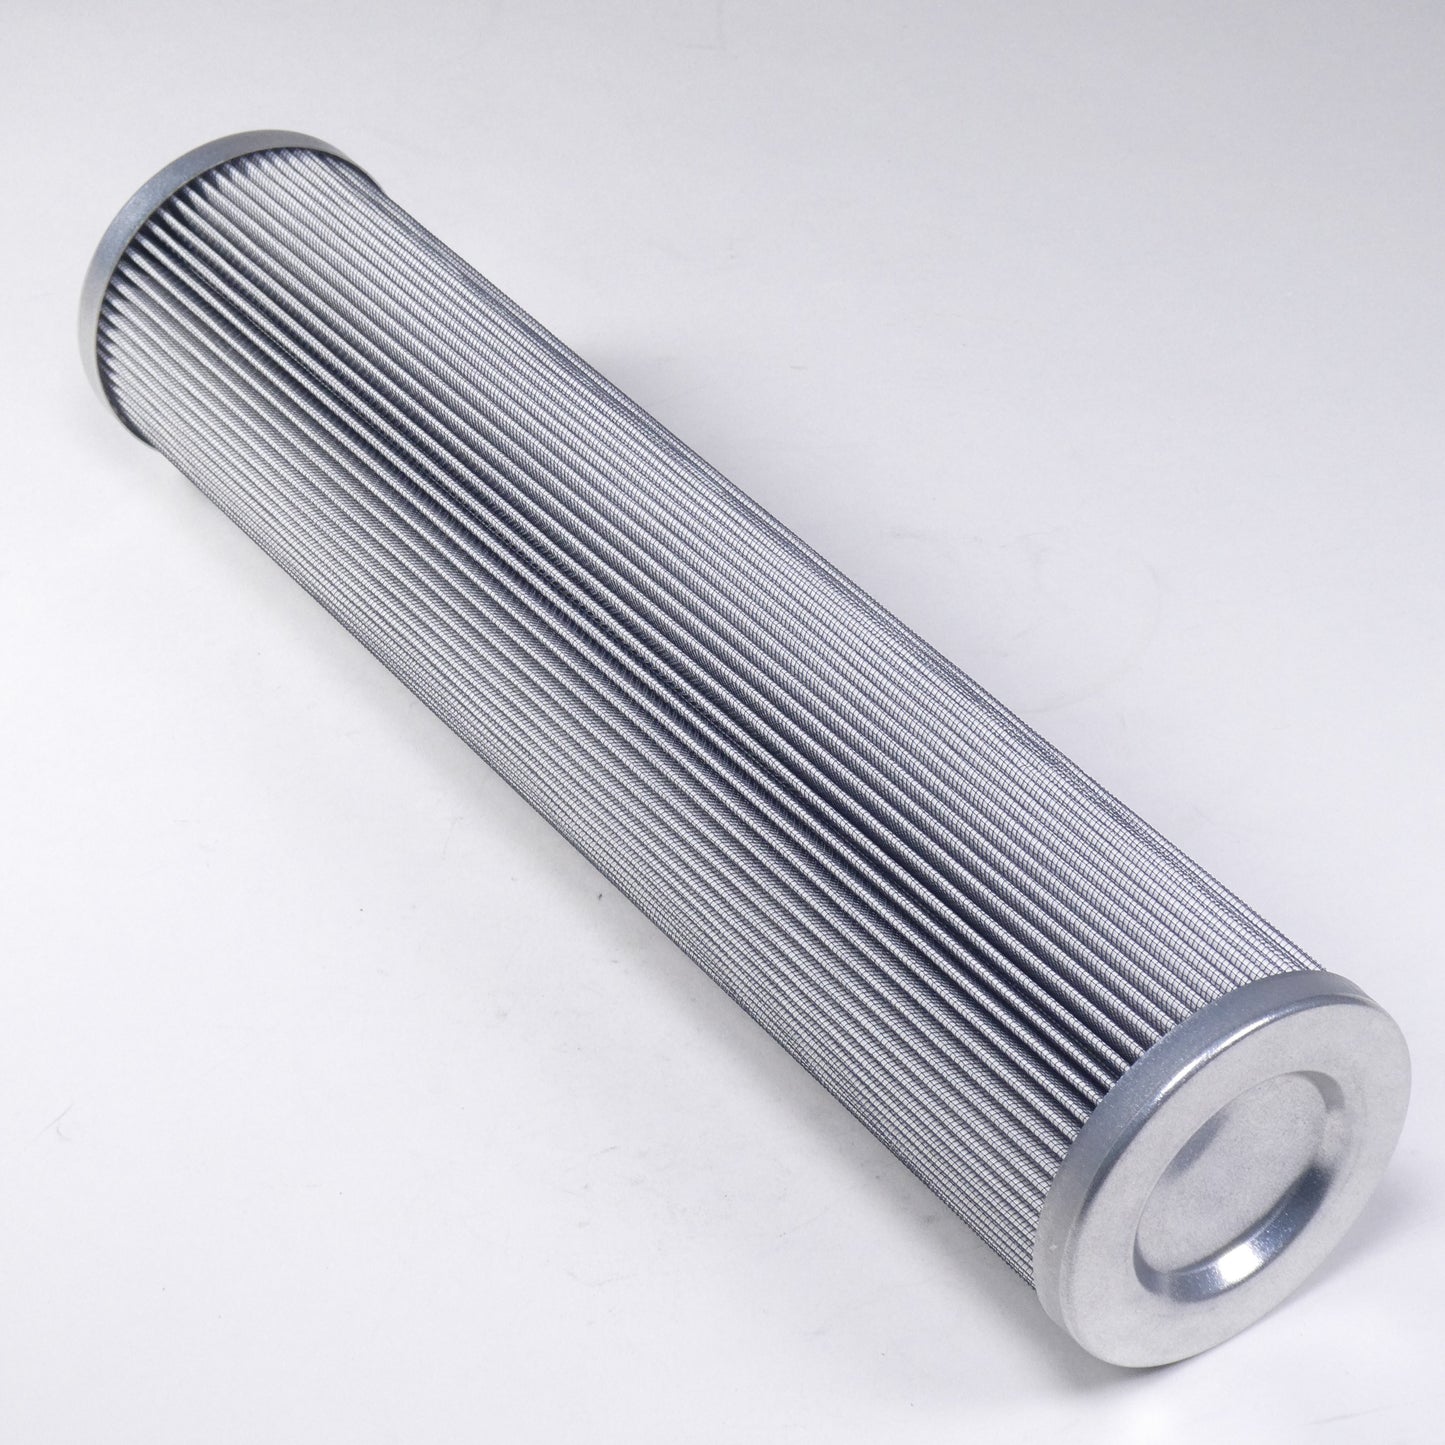 Hydrafil Replacement Filter Element for Filtersoft H8916MAB